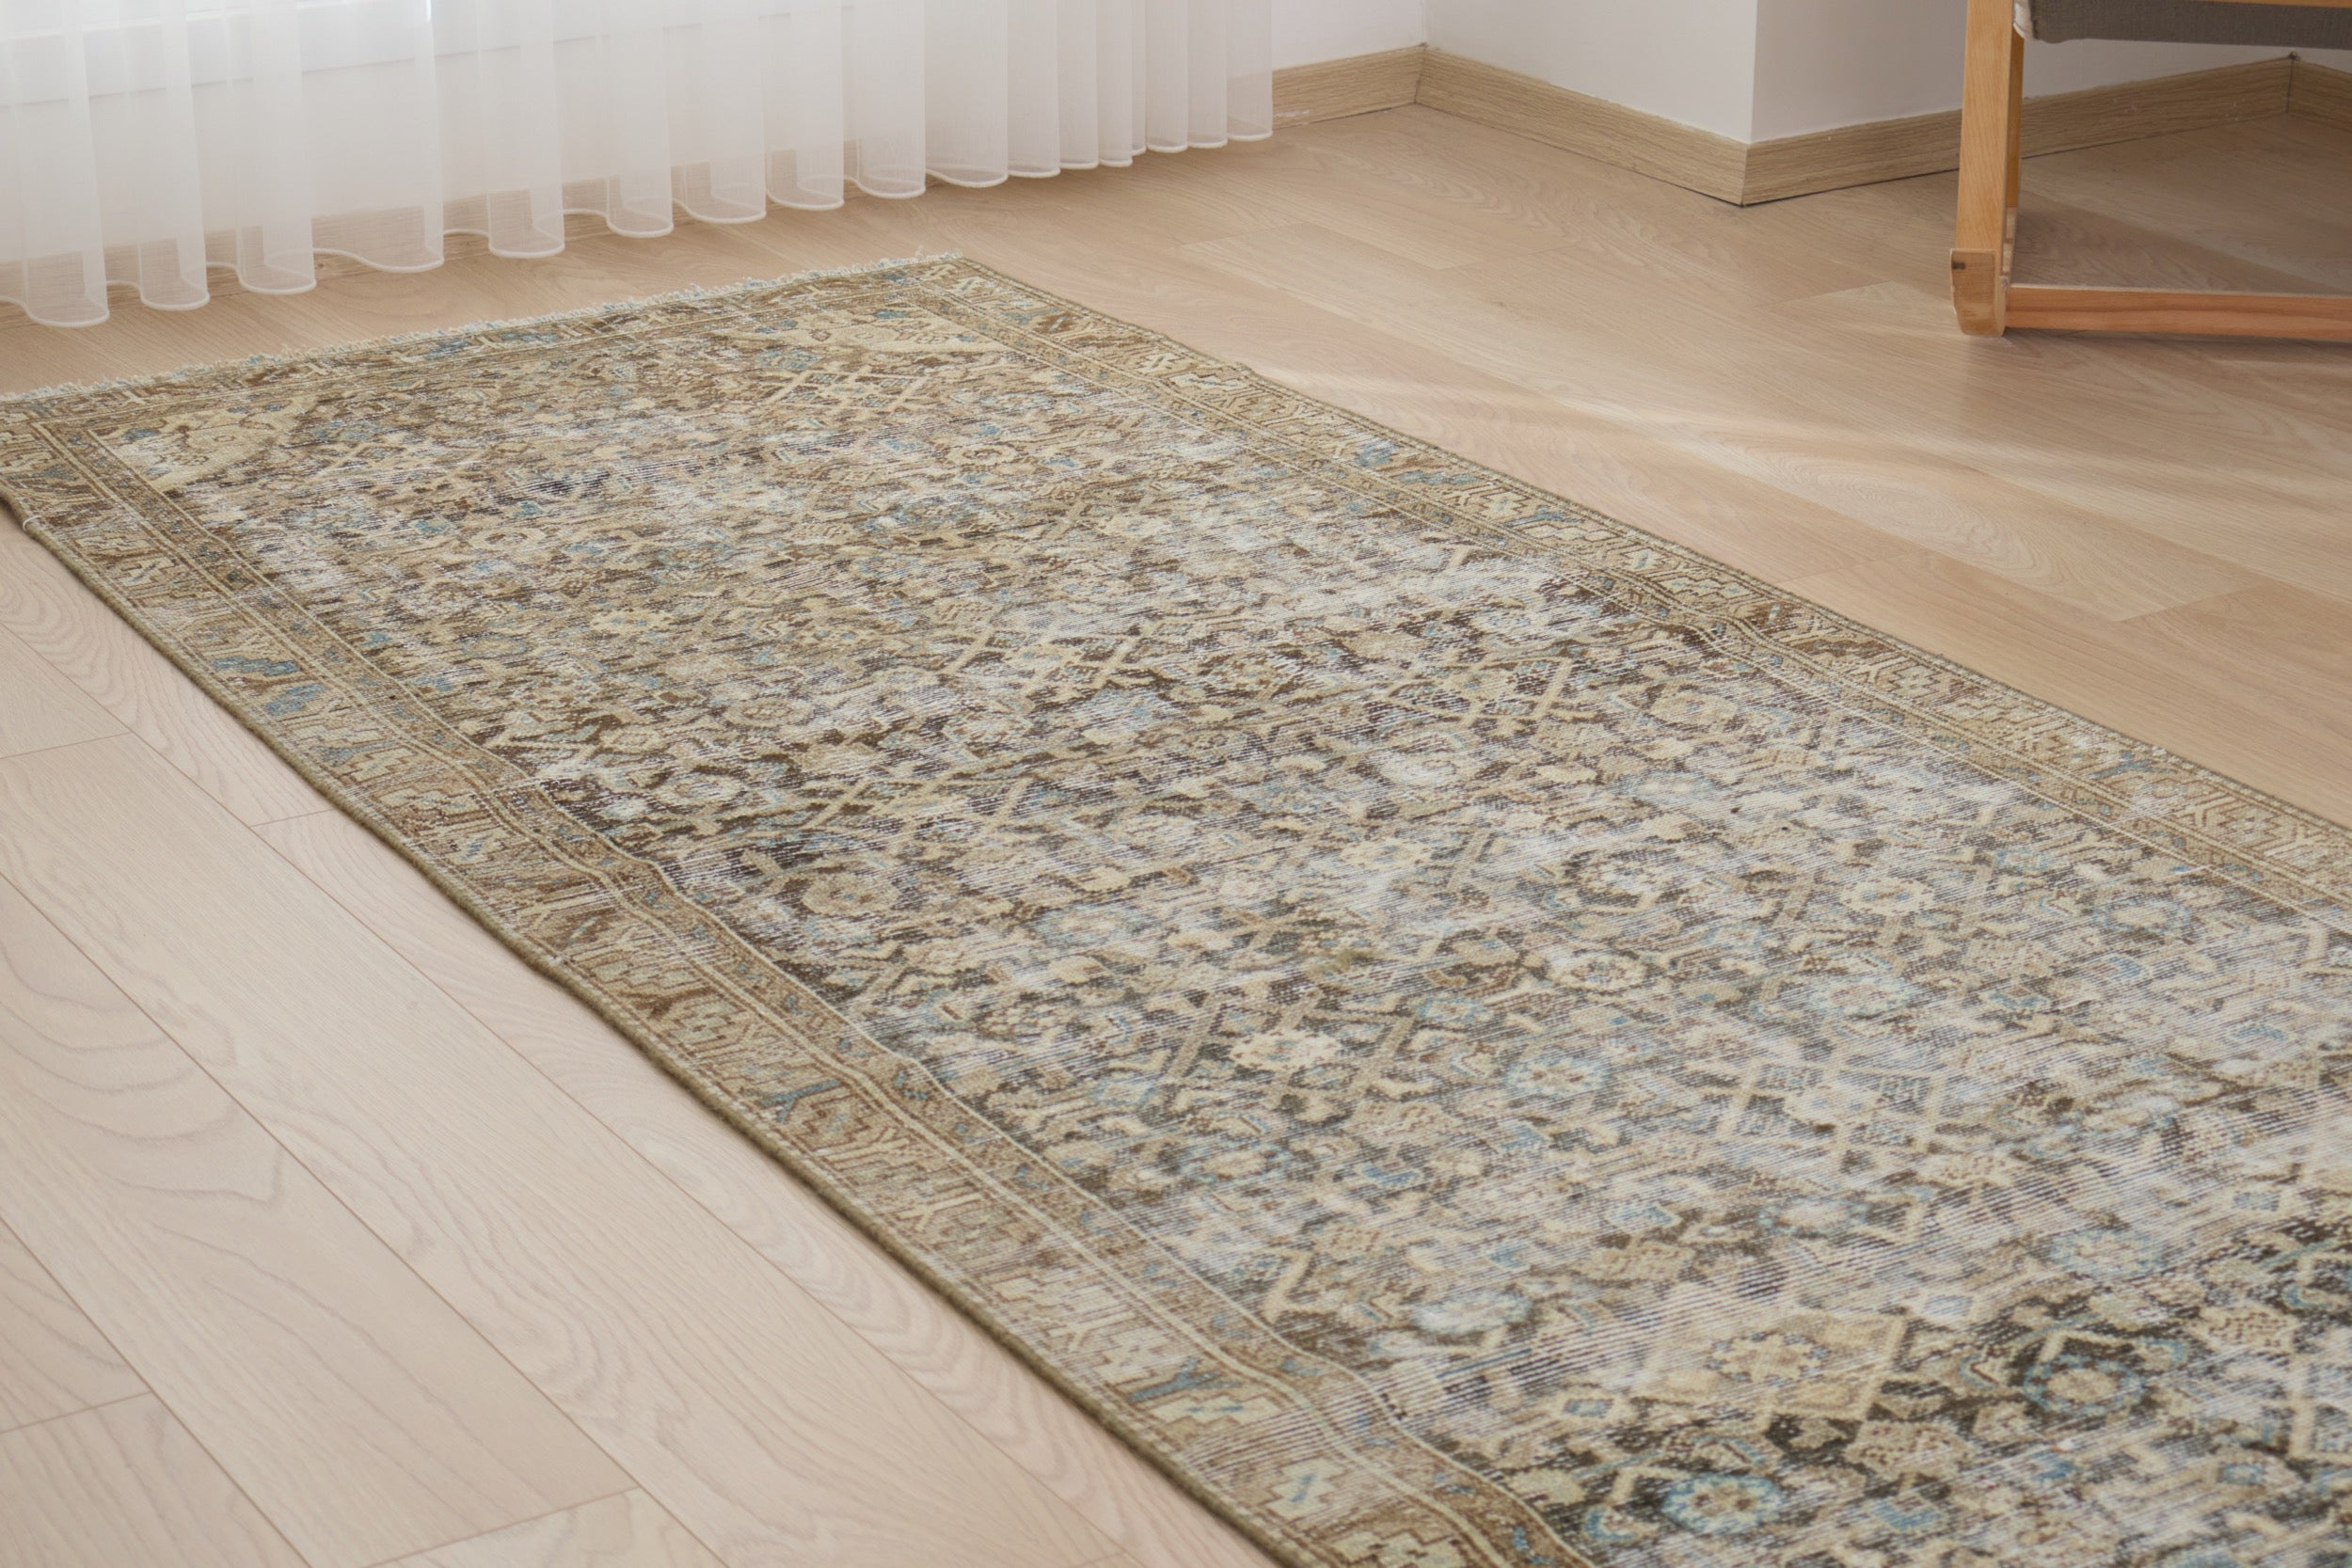 Shateque - Where Tradition Meets Modern Elegance | Kuden Rugs